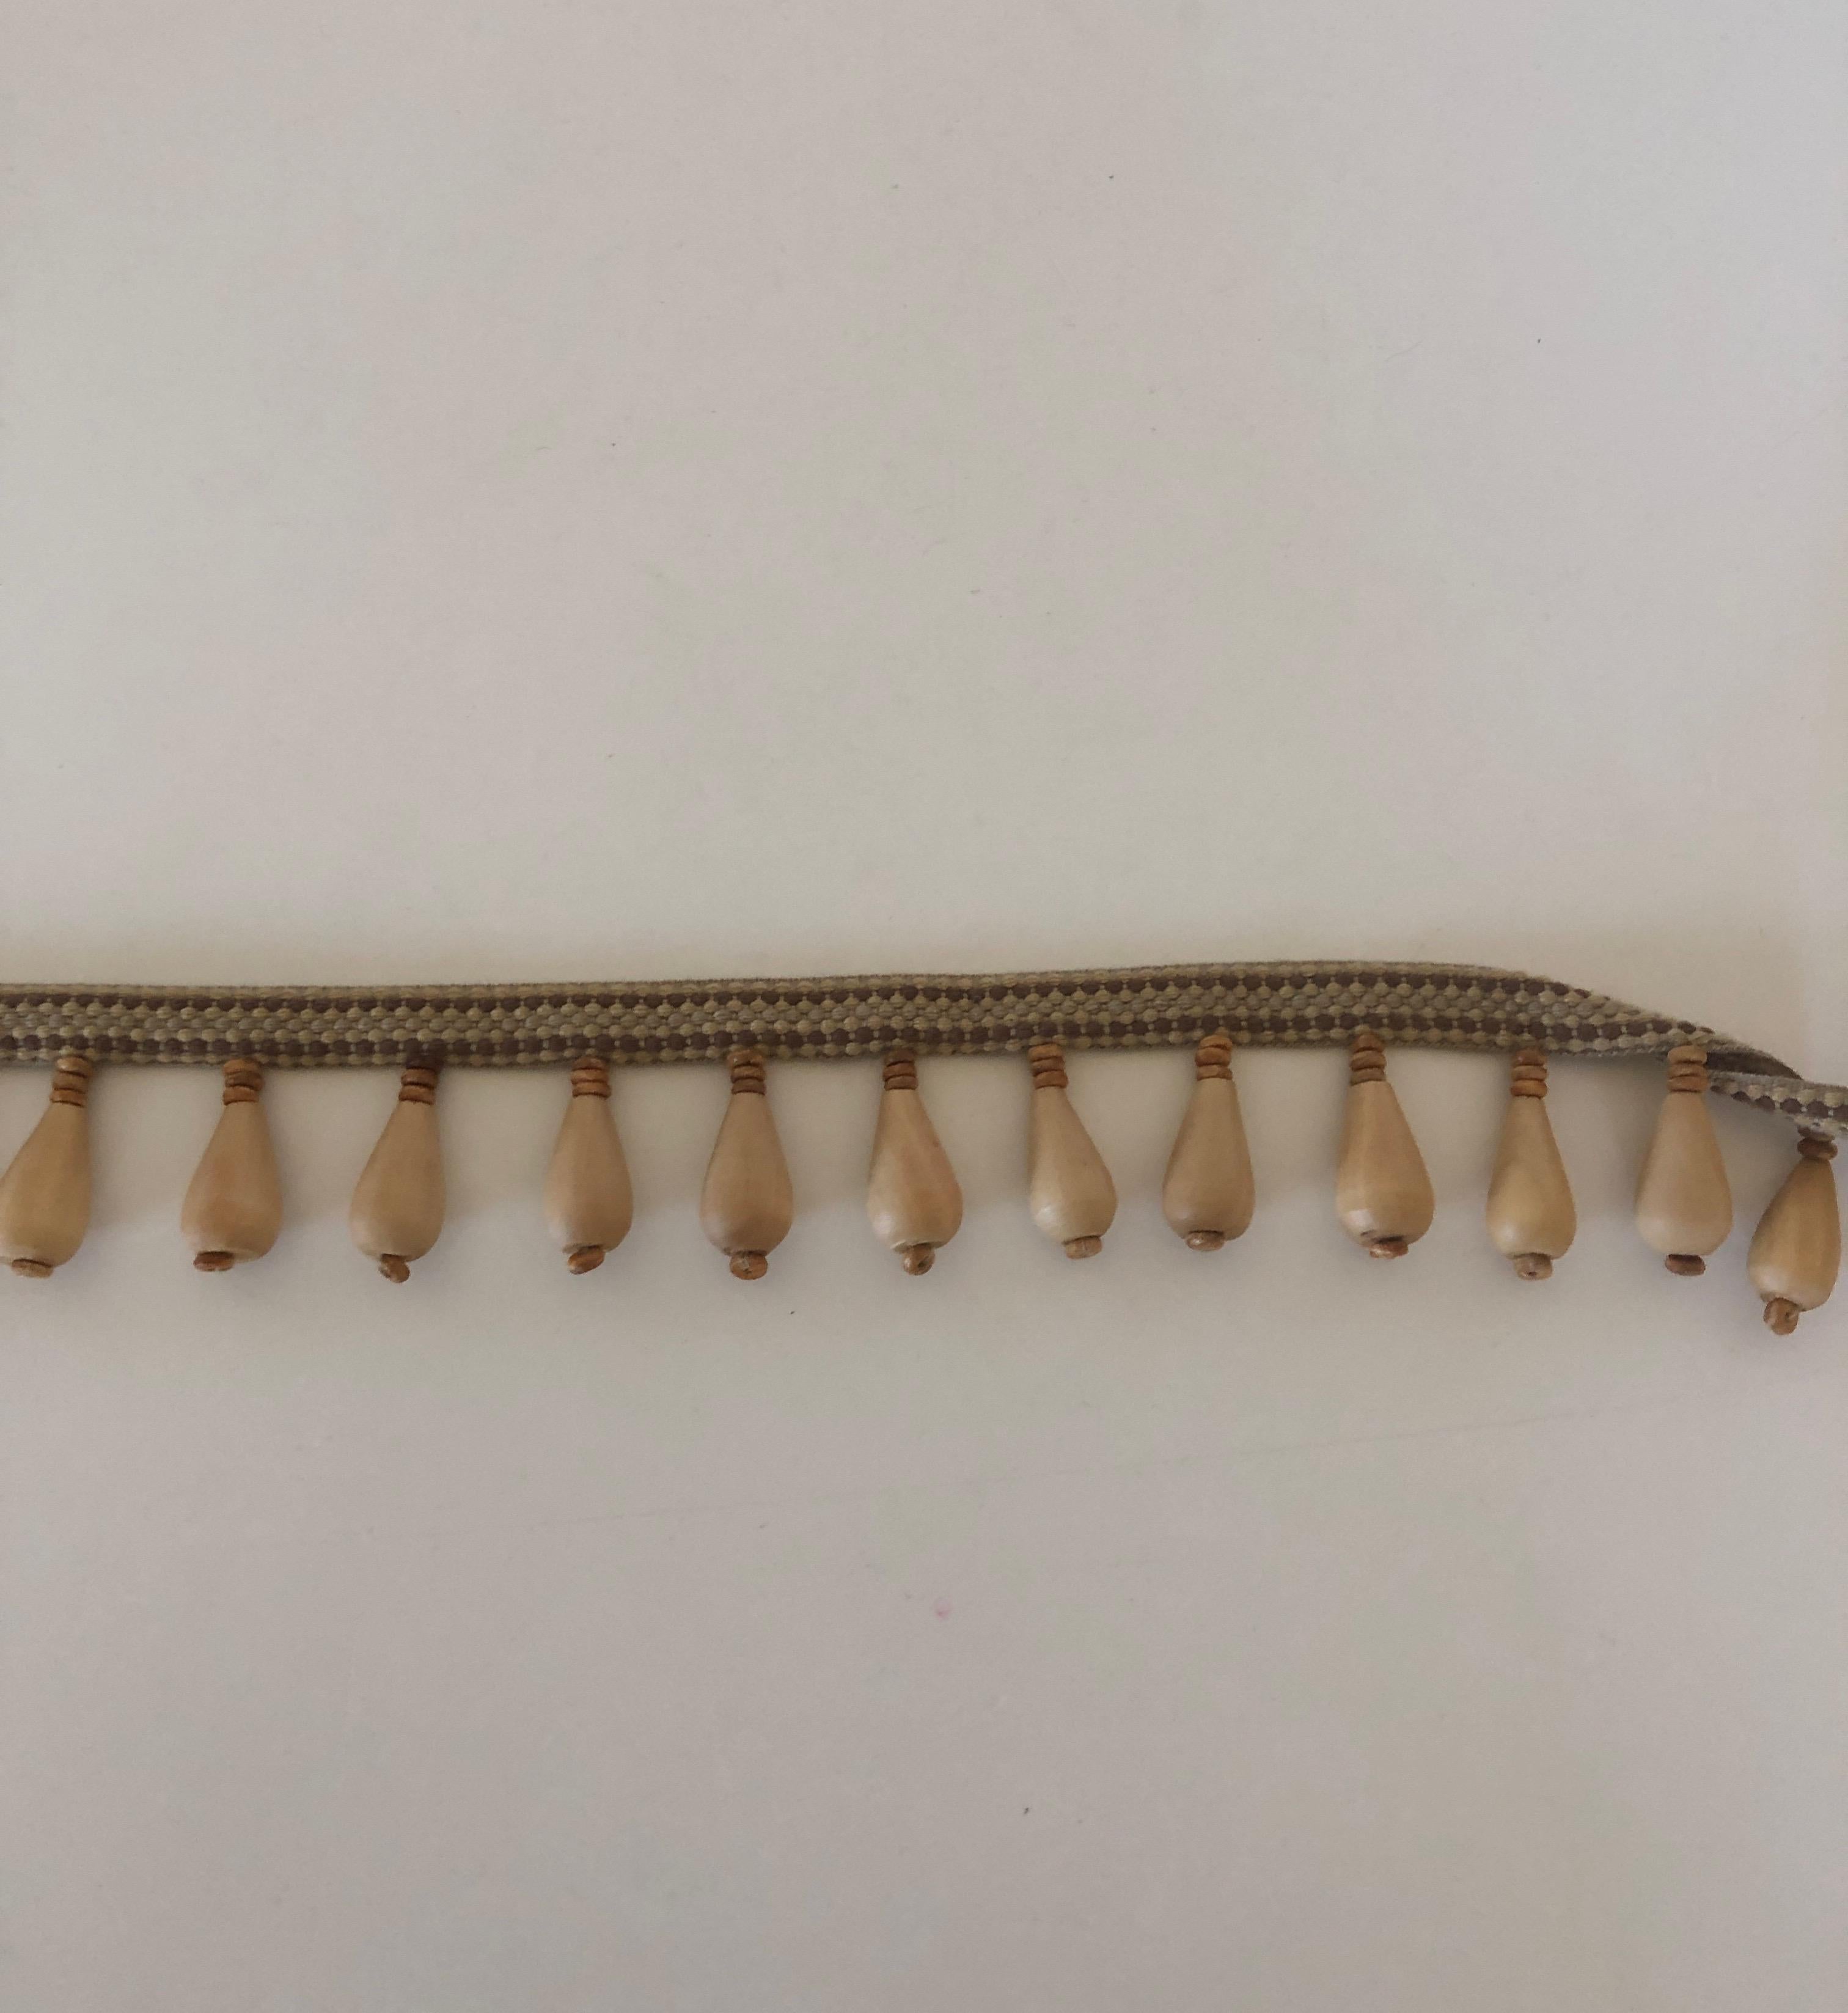 Wooden beaded tassels decorative fringe trim.
Wood beads on cotton gimp trim.
Color: Smoky quartz
Ideal for pillows, curtains and lampshades.
Sold as is.
Size: 24” long piece + 8 yards and 25 inches x 2